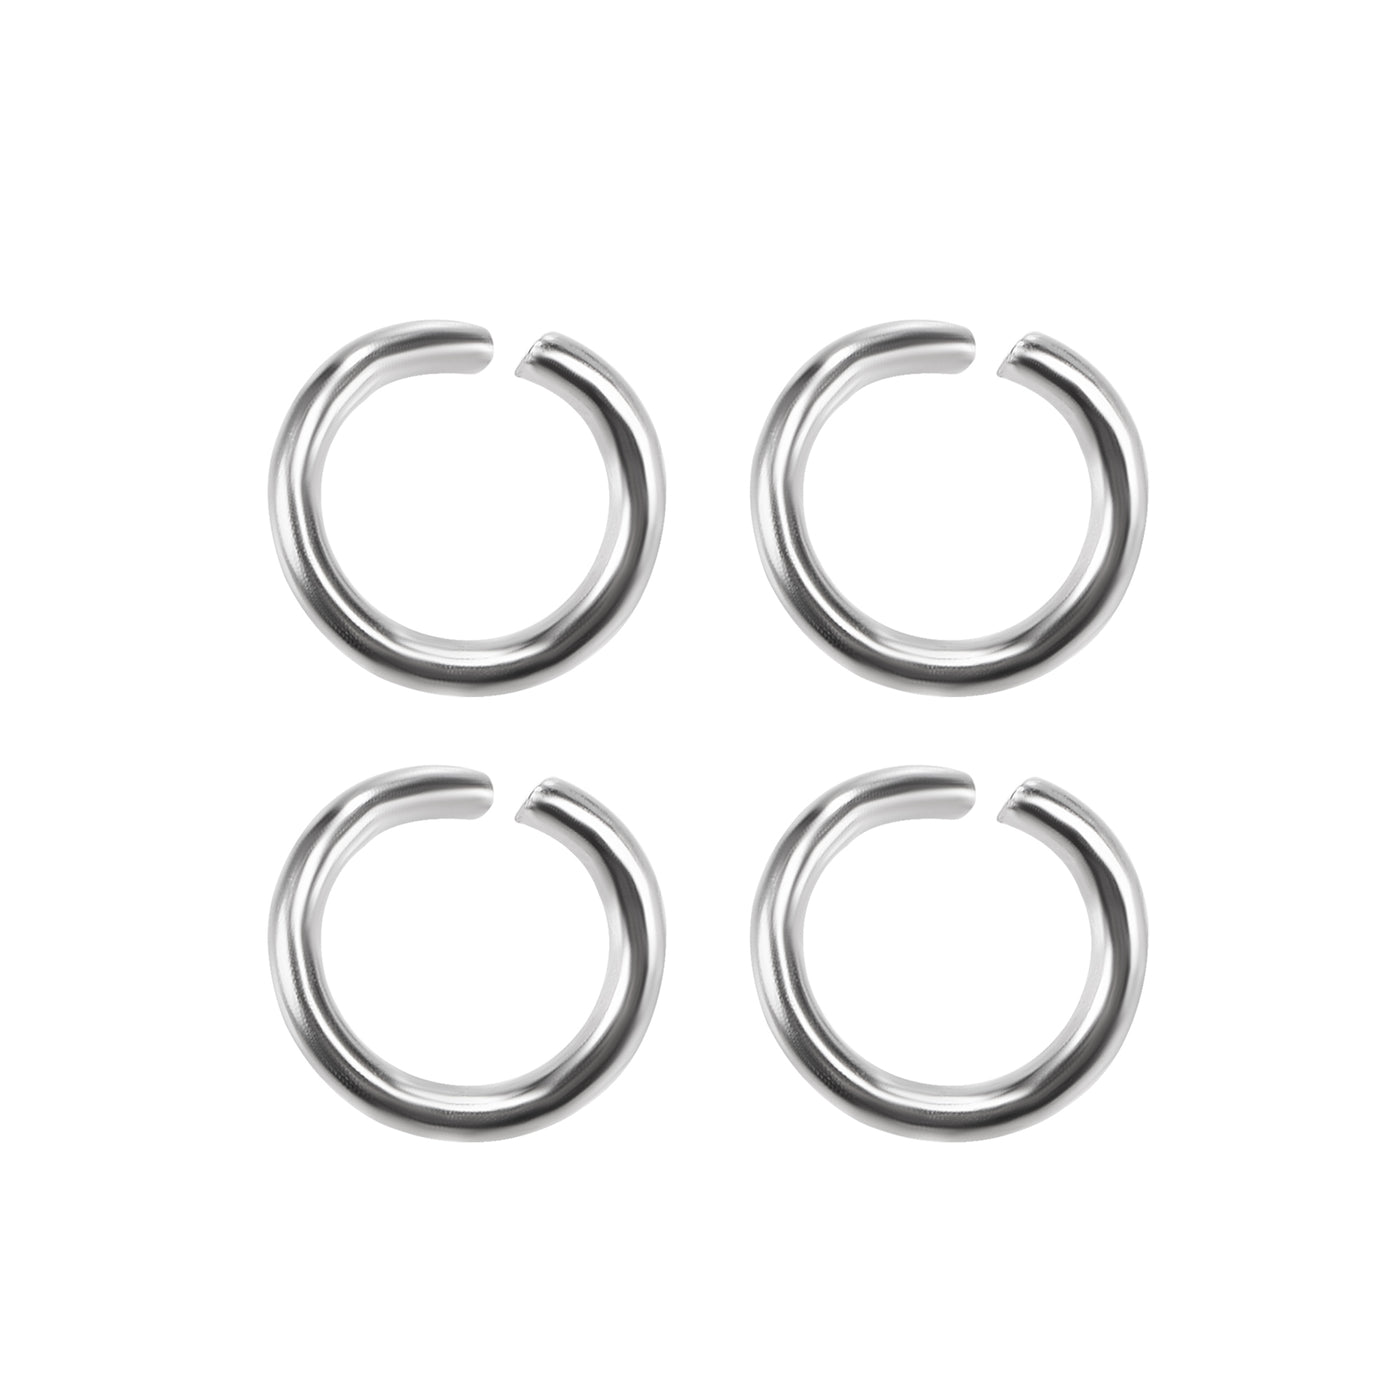 uxcell Uxcell Open Jump Rings 8mm Keychain Connector for Craft  Bracelet Pendant, Nickel Plated Iron, Silver Pack of 500